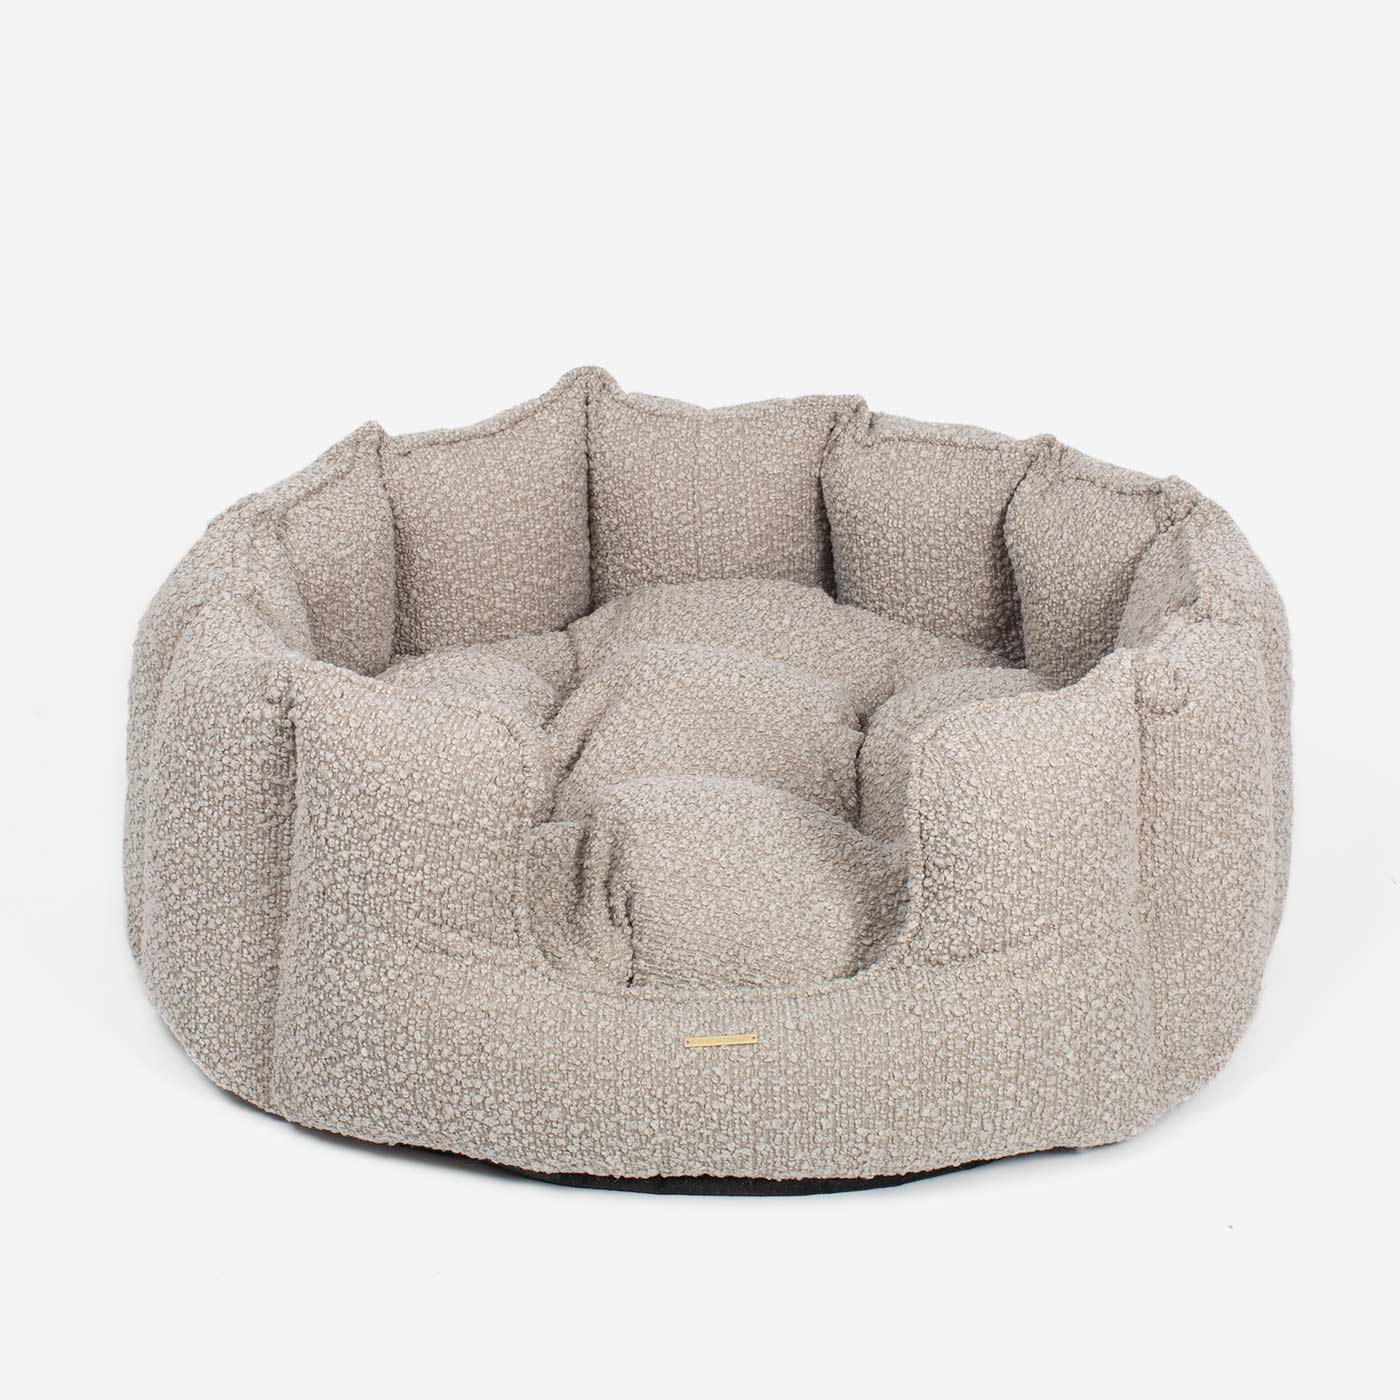 [color:mink boucle] Discover Our Luxurious High Wall Bed For Cats & Kittens, Featuring inner pillow with plush teddy fleece on one side To Craft The Perfect Cat Bed In Stunning Mink Boucle! Available To Personalize Now at Lords & Labradors US